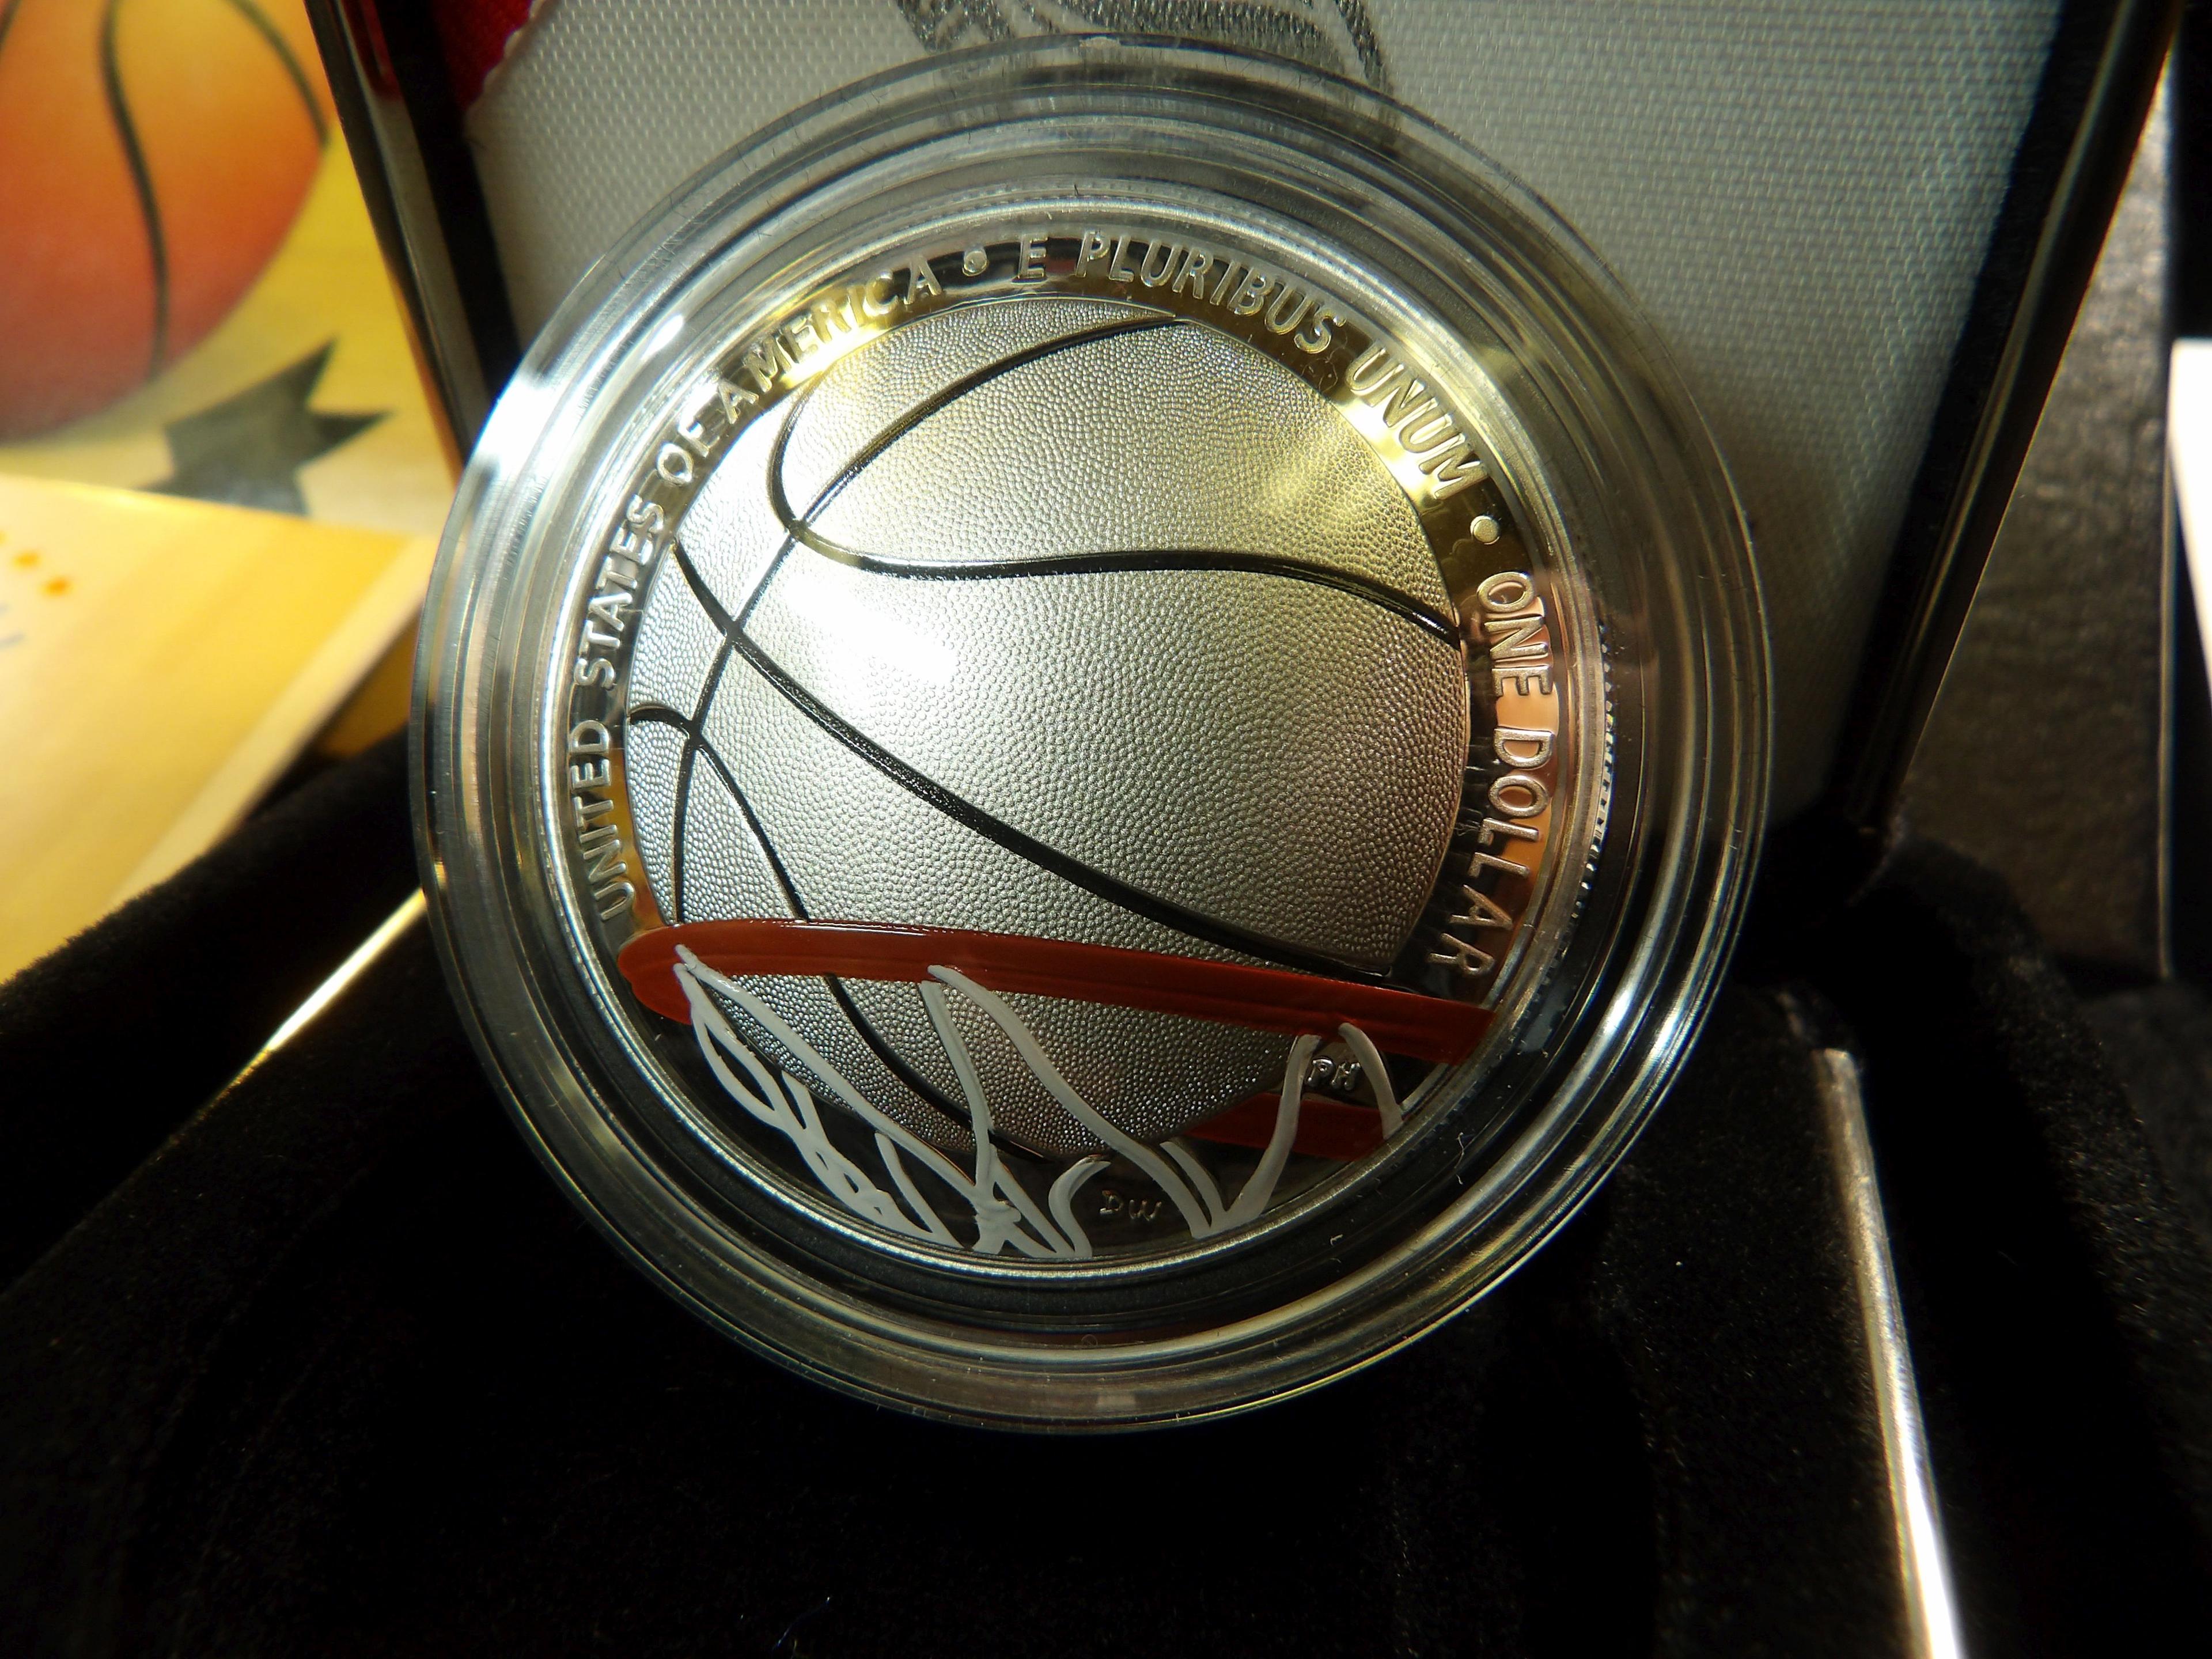 2020 S Basketball Hall of Fame Proof Commemorative Silver Dollar in original U.S. Mint box of issue.